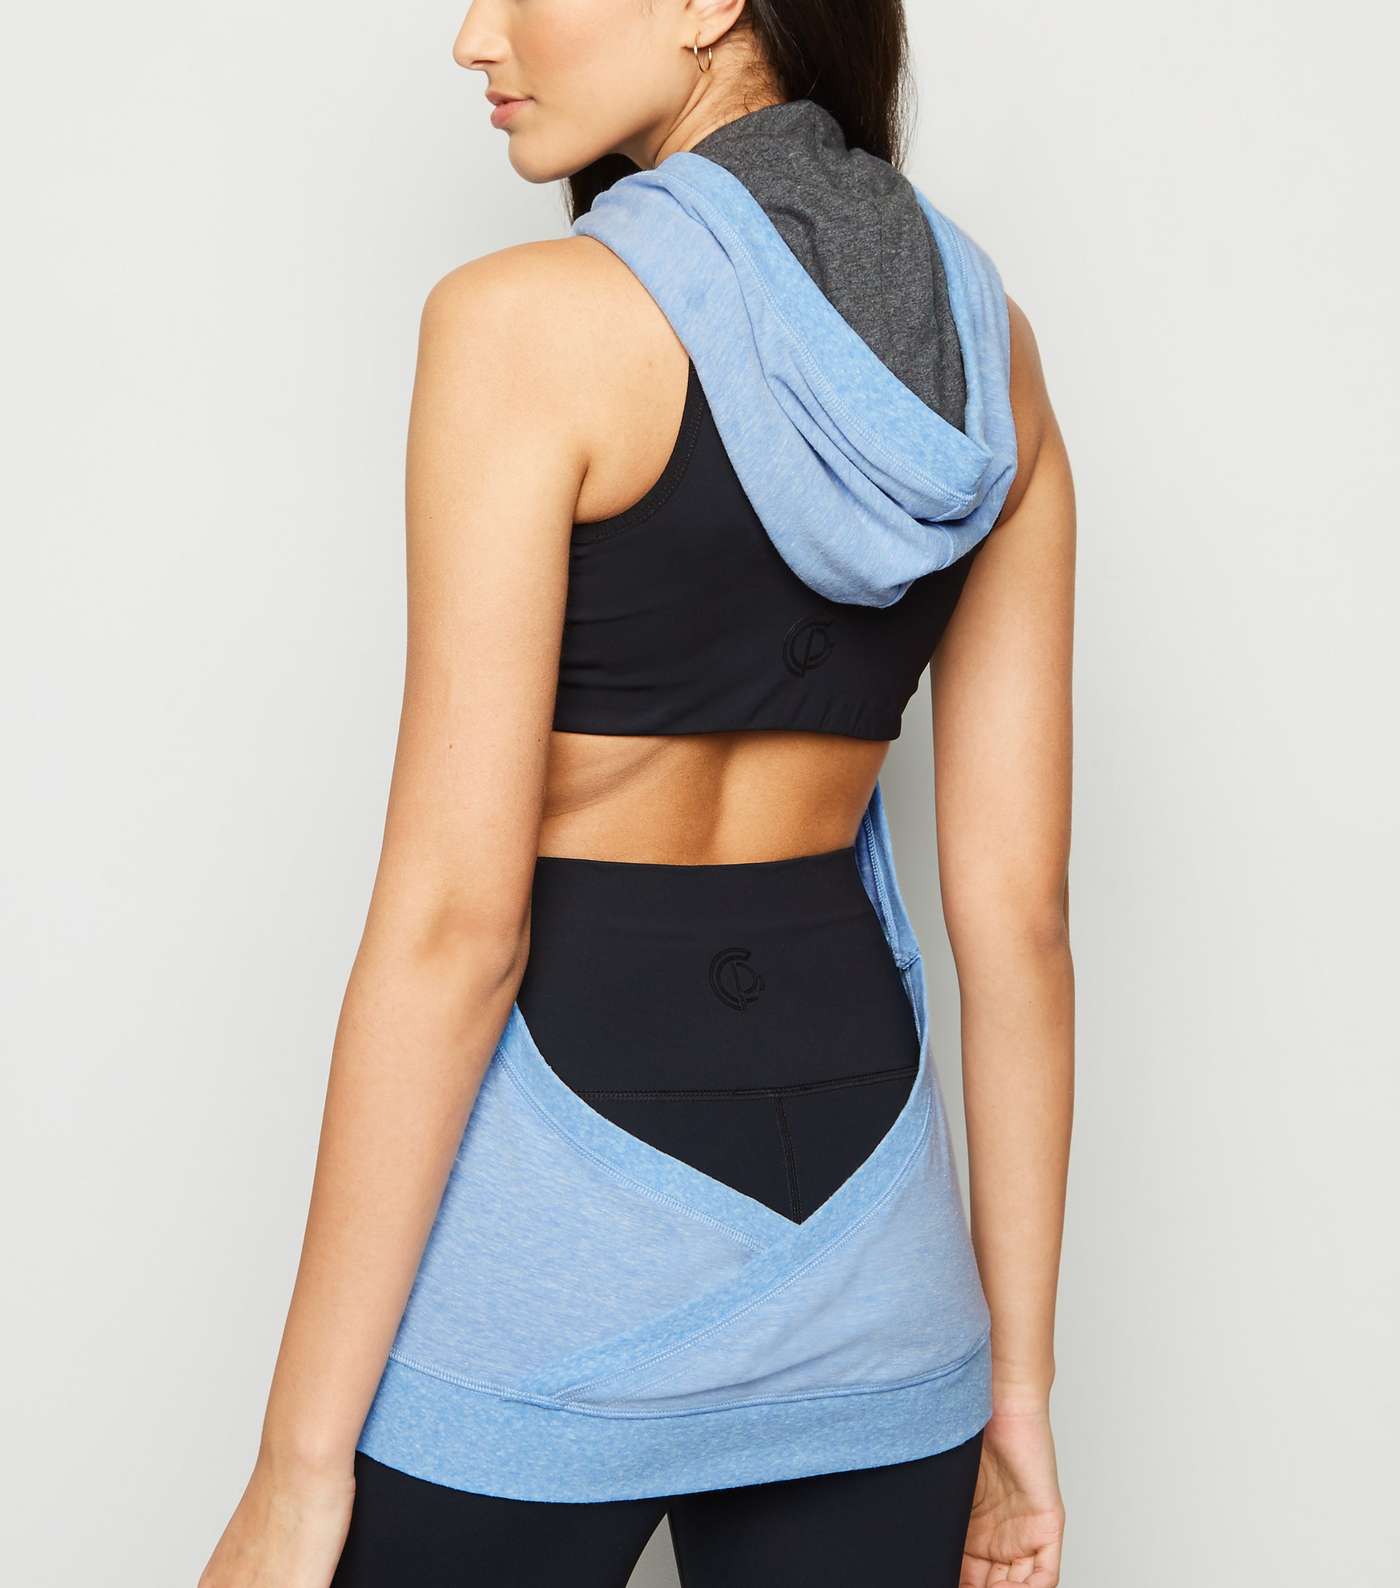 GymPro Pale Blue Backless Sports Hoodie Image 3